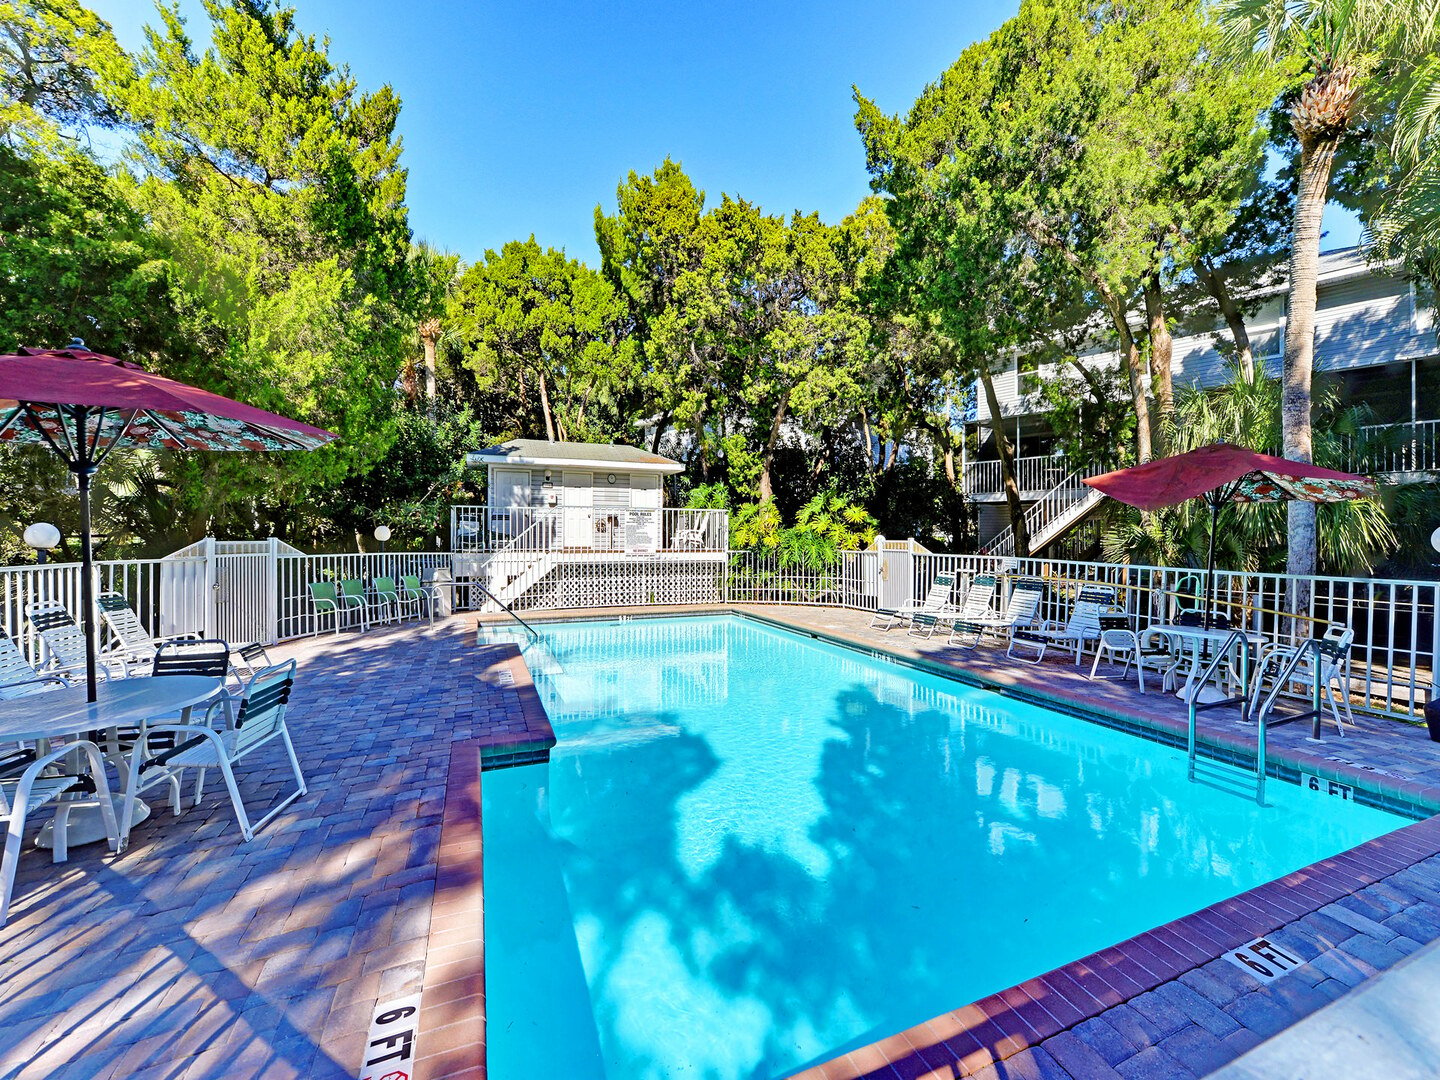 The pool at one of our vacation rentals in Anna Maria island